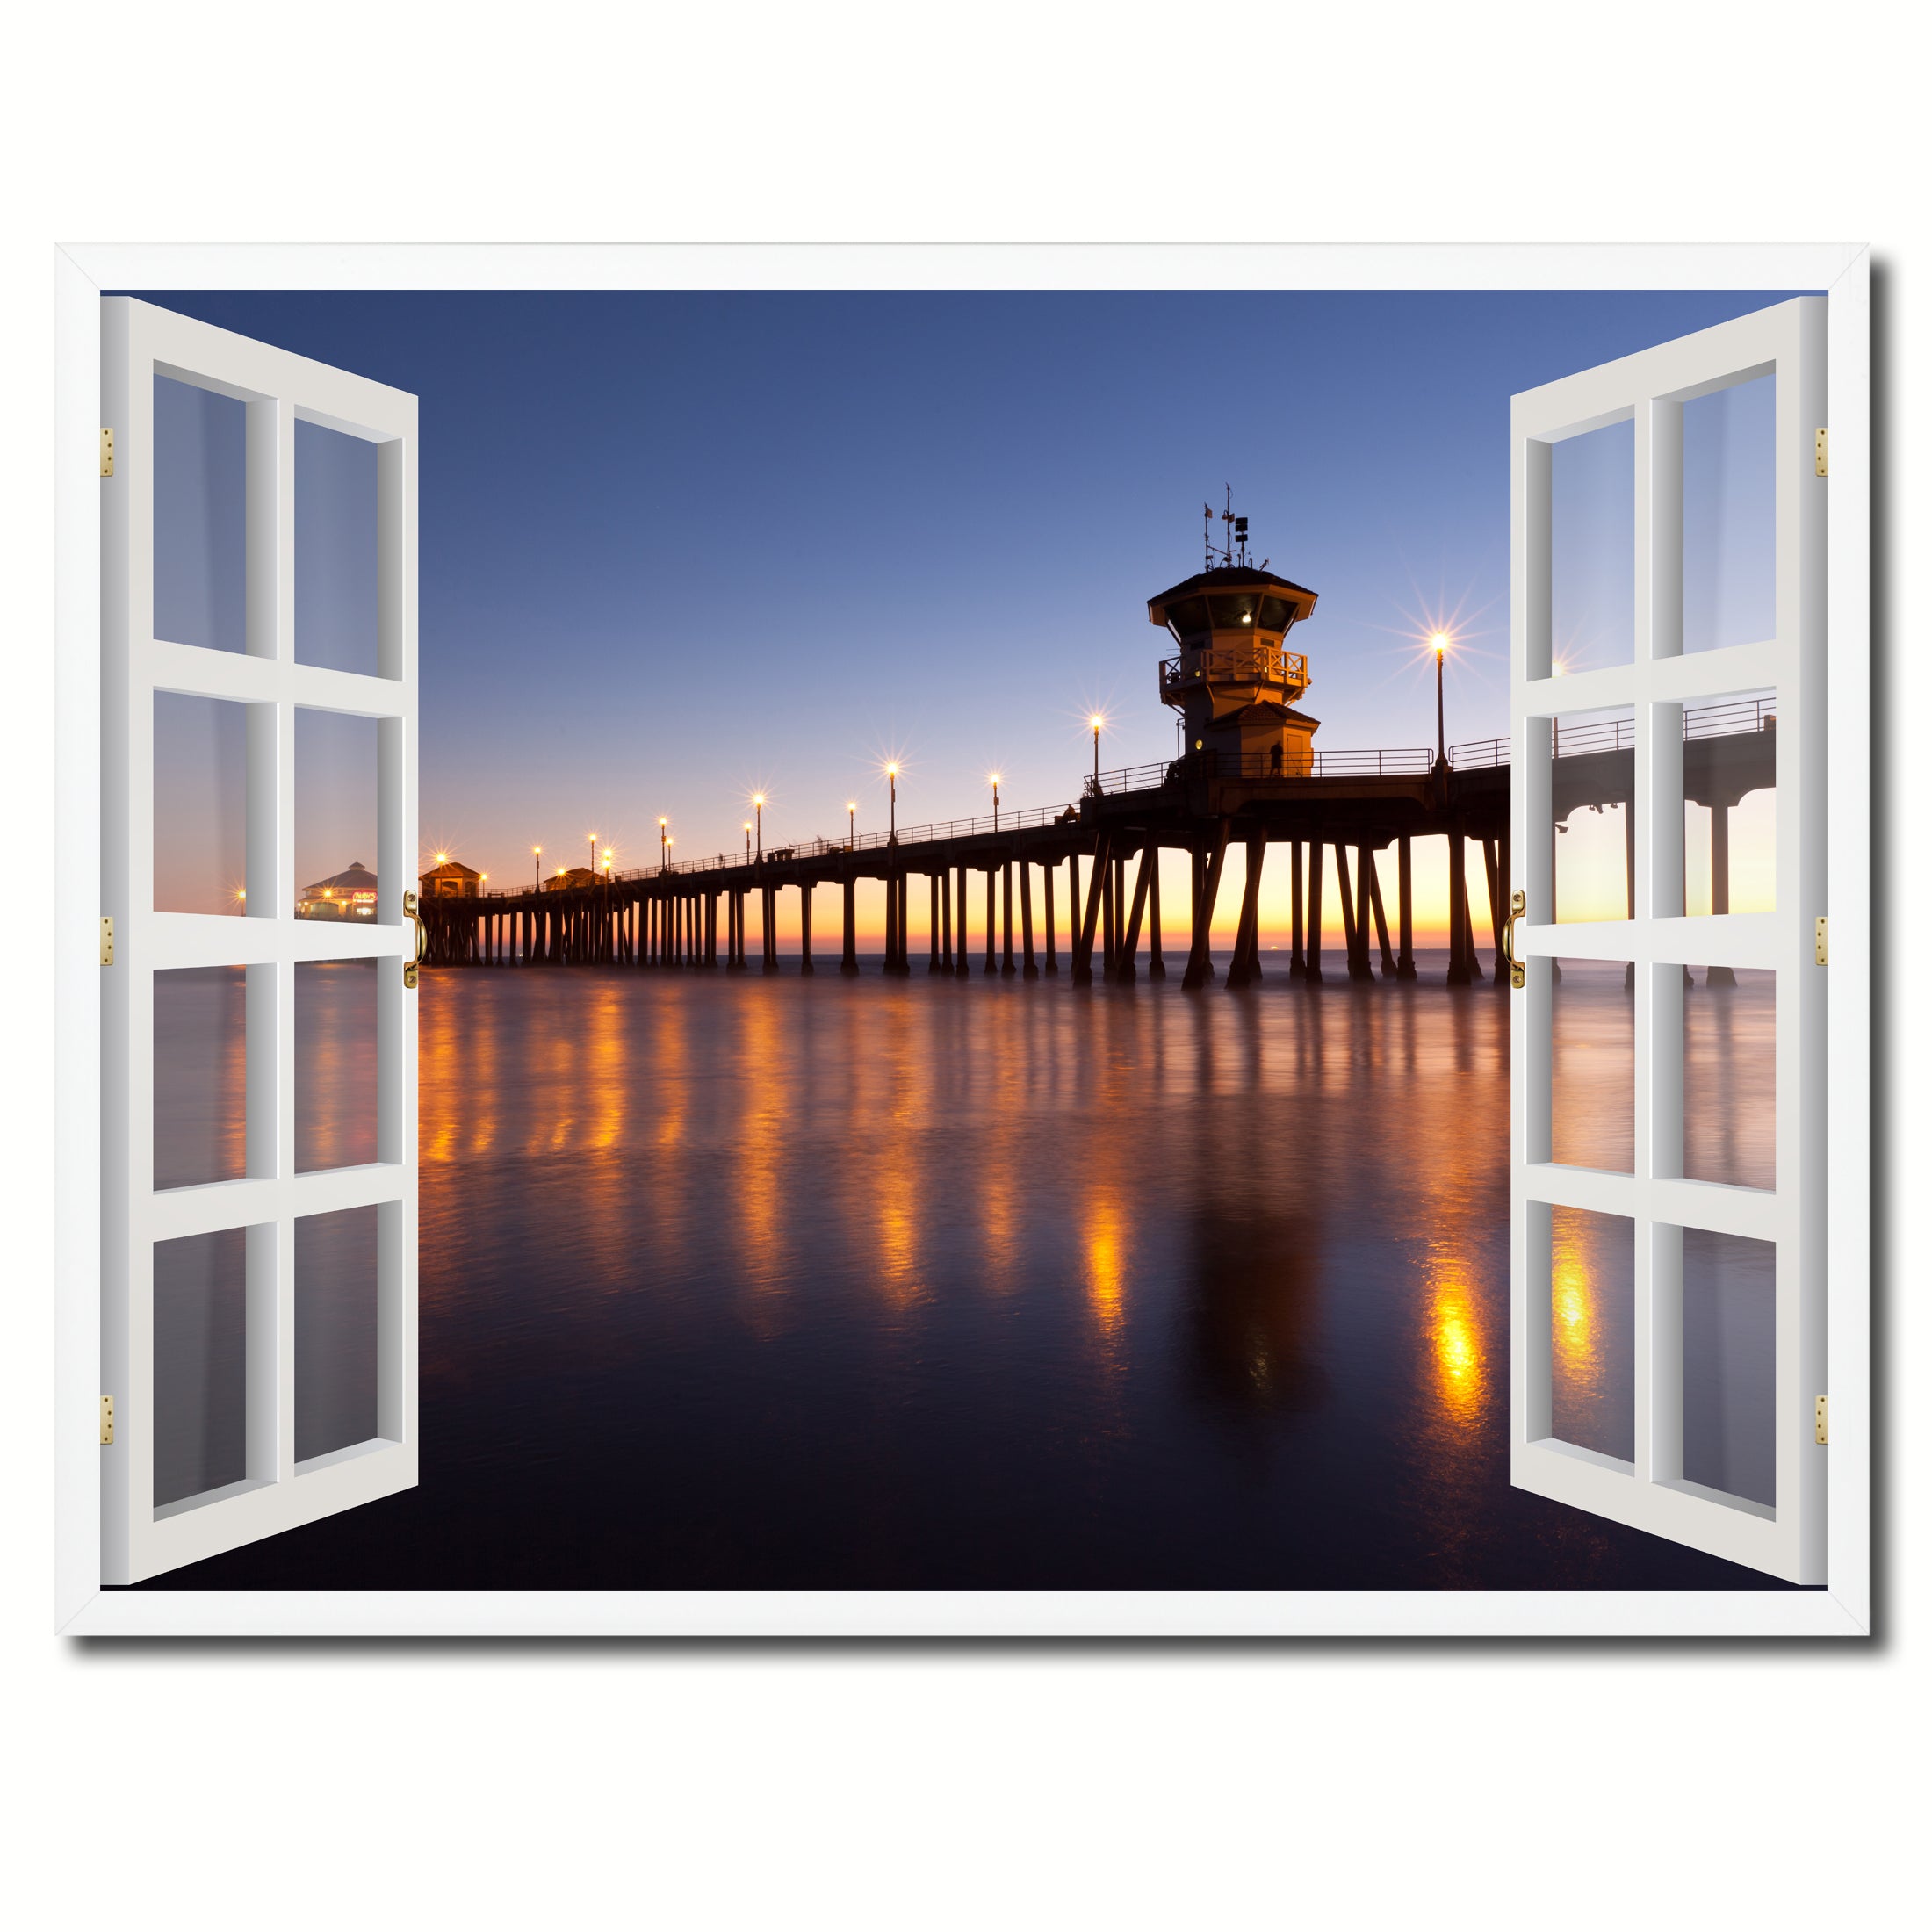 Huntington Beach California Picture French Window Framed Canvas Print Home Decor Wall Art Collection